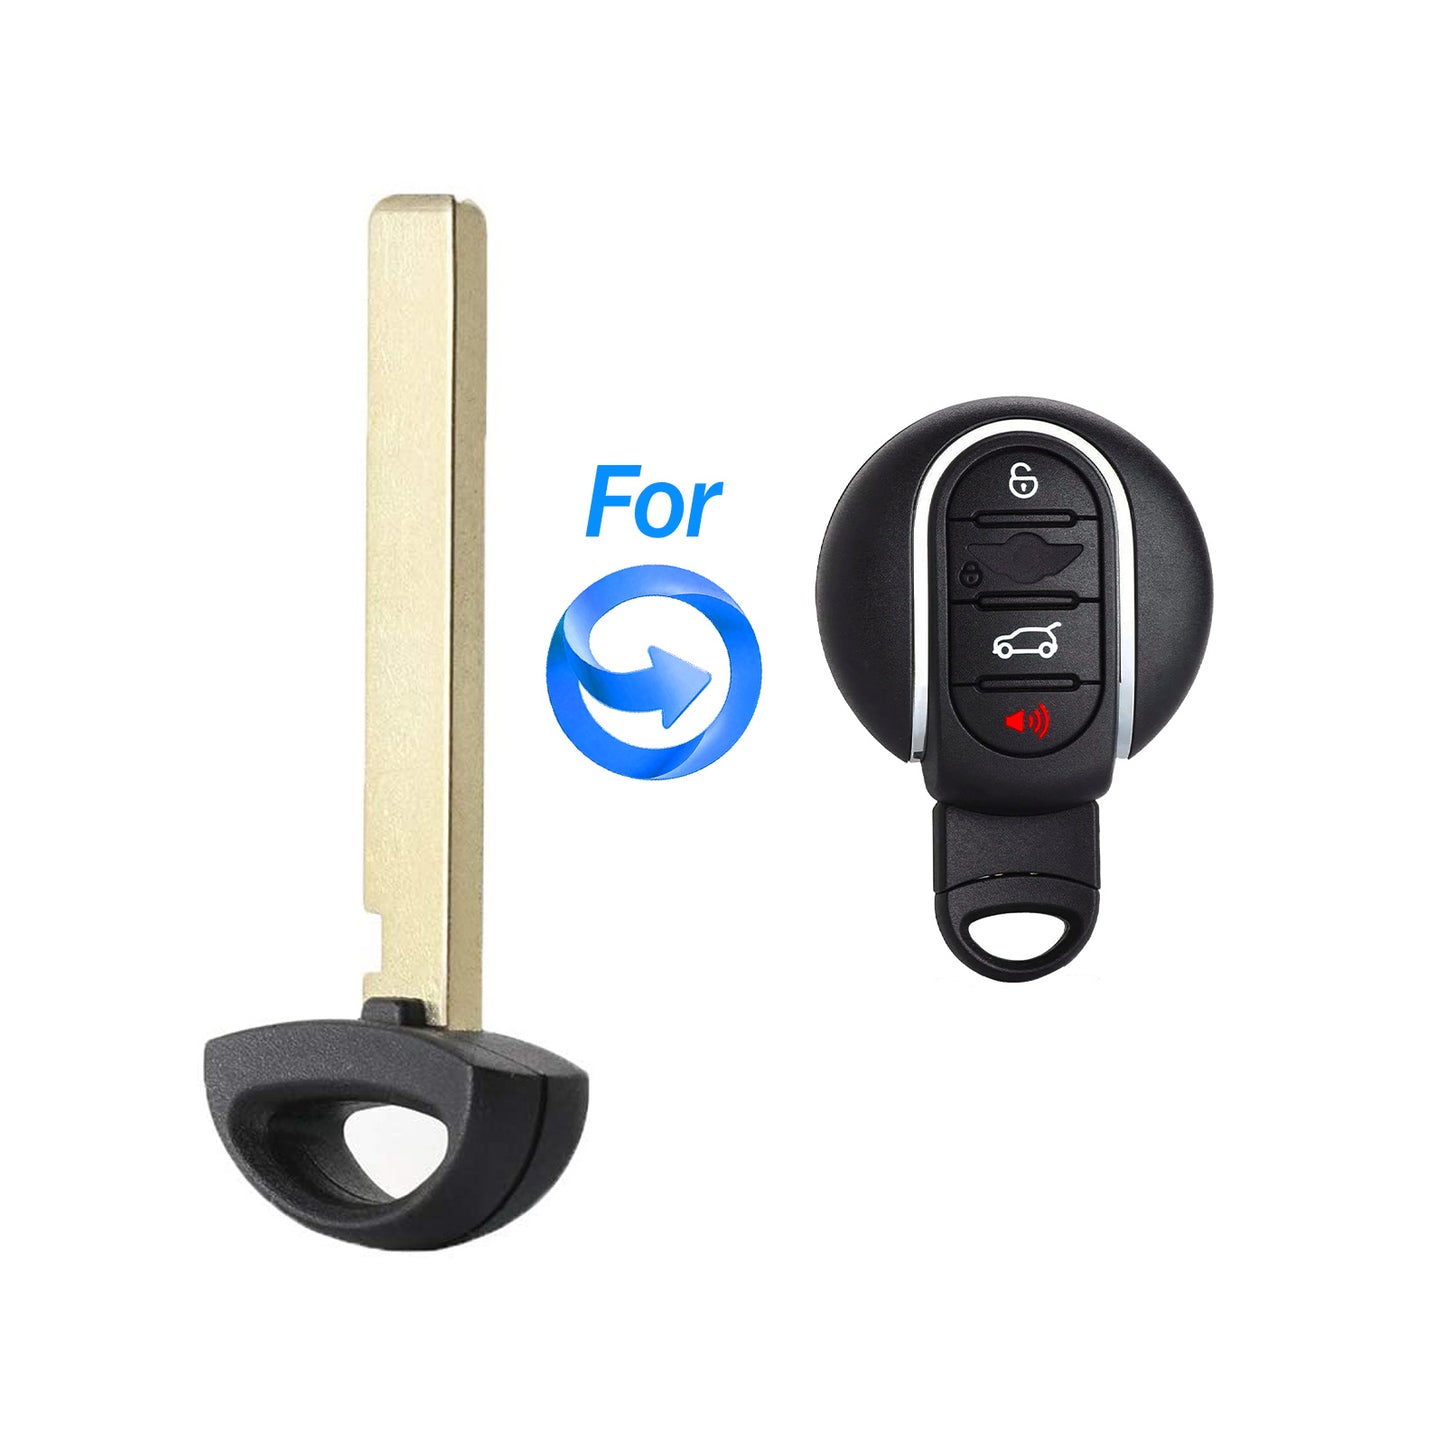 4 Buttons 434MHz Keyless Entry Smart Remote Key Fob for BMW MINI Copper 2015-2019 FCC : NBGIDGNG1 P/N : 9367411-01 185409-10 SKU:498